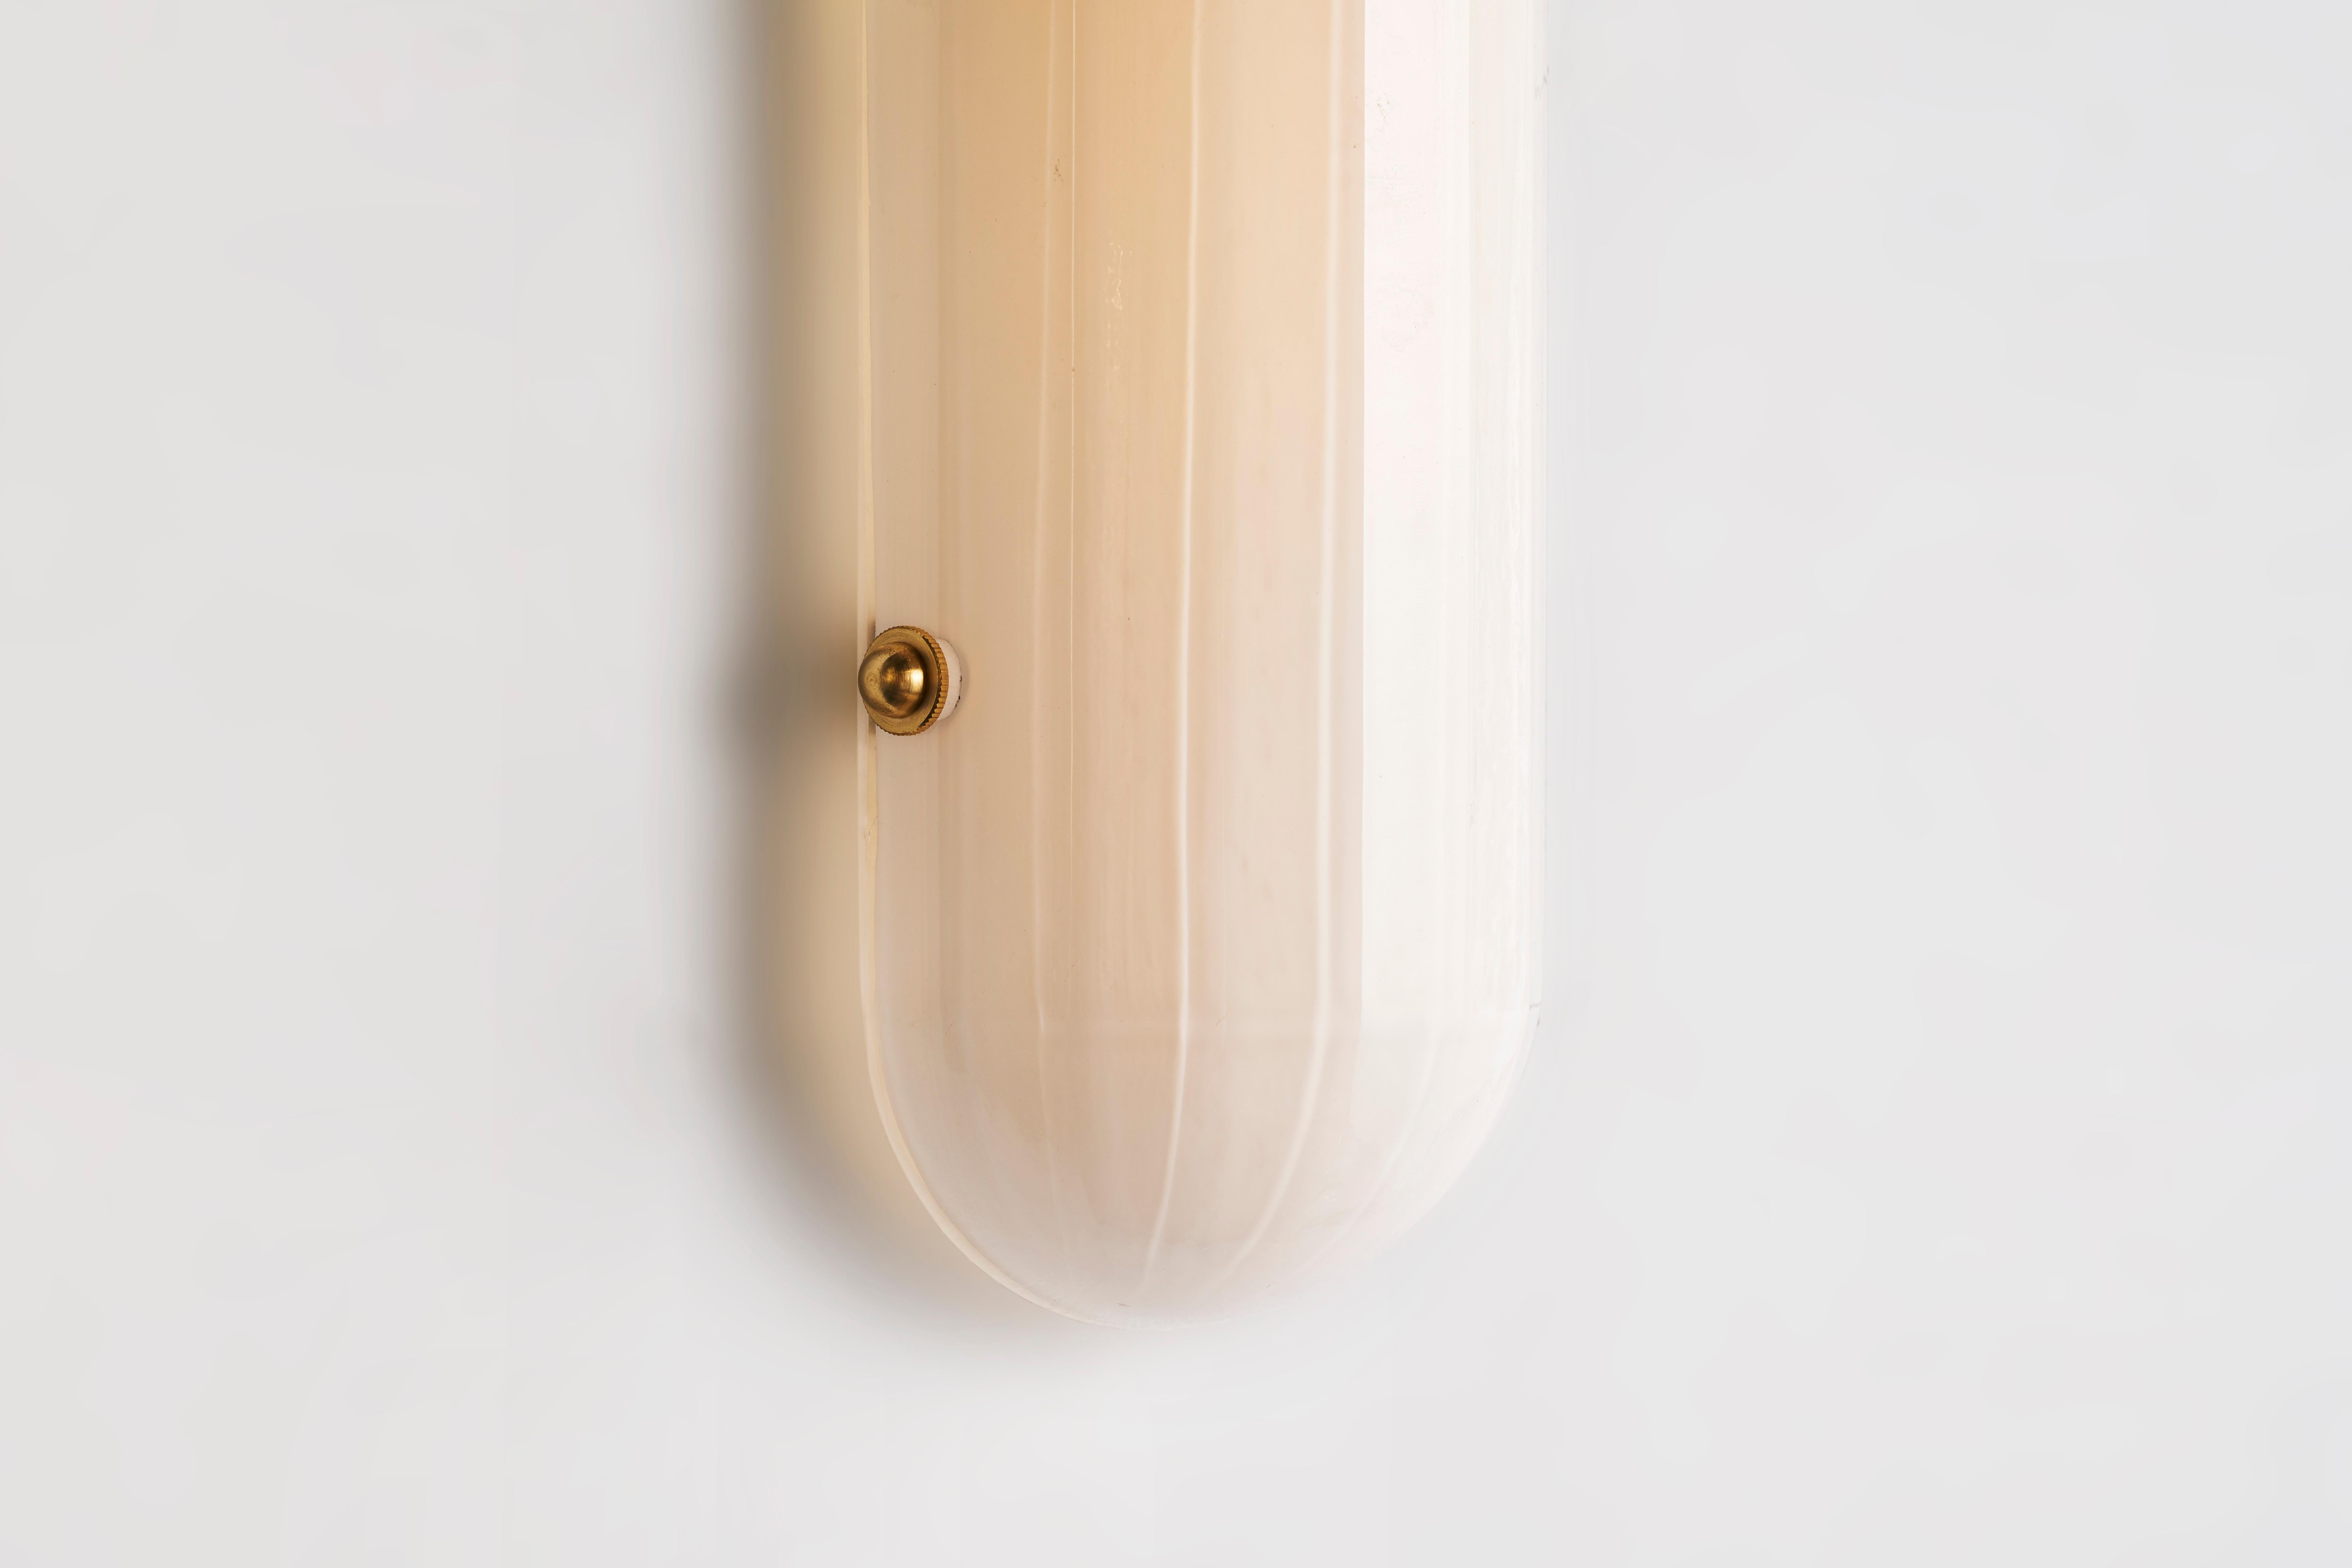 Inspired by Art Moderne, the Selene sconce is part of Bianco light and space, streamline series. Composed of mold blown faceted glass shown in enamel white and brass hardware with LEDs providing a warm directional light maximizing efficiency and